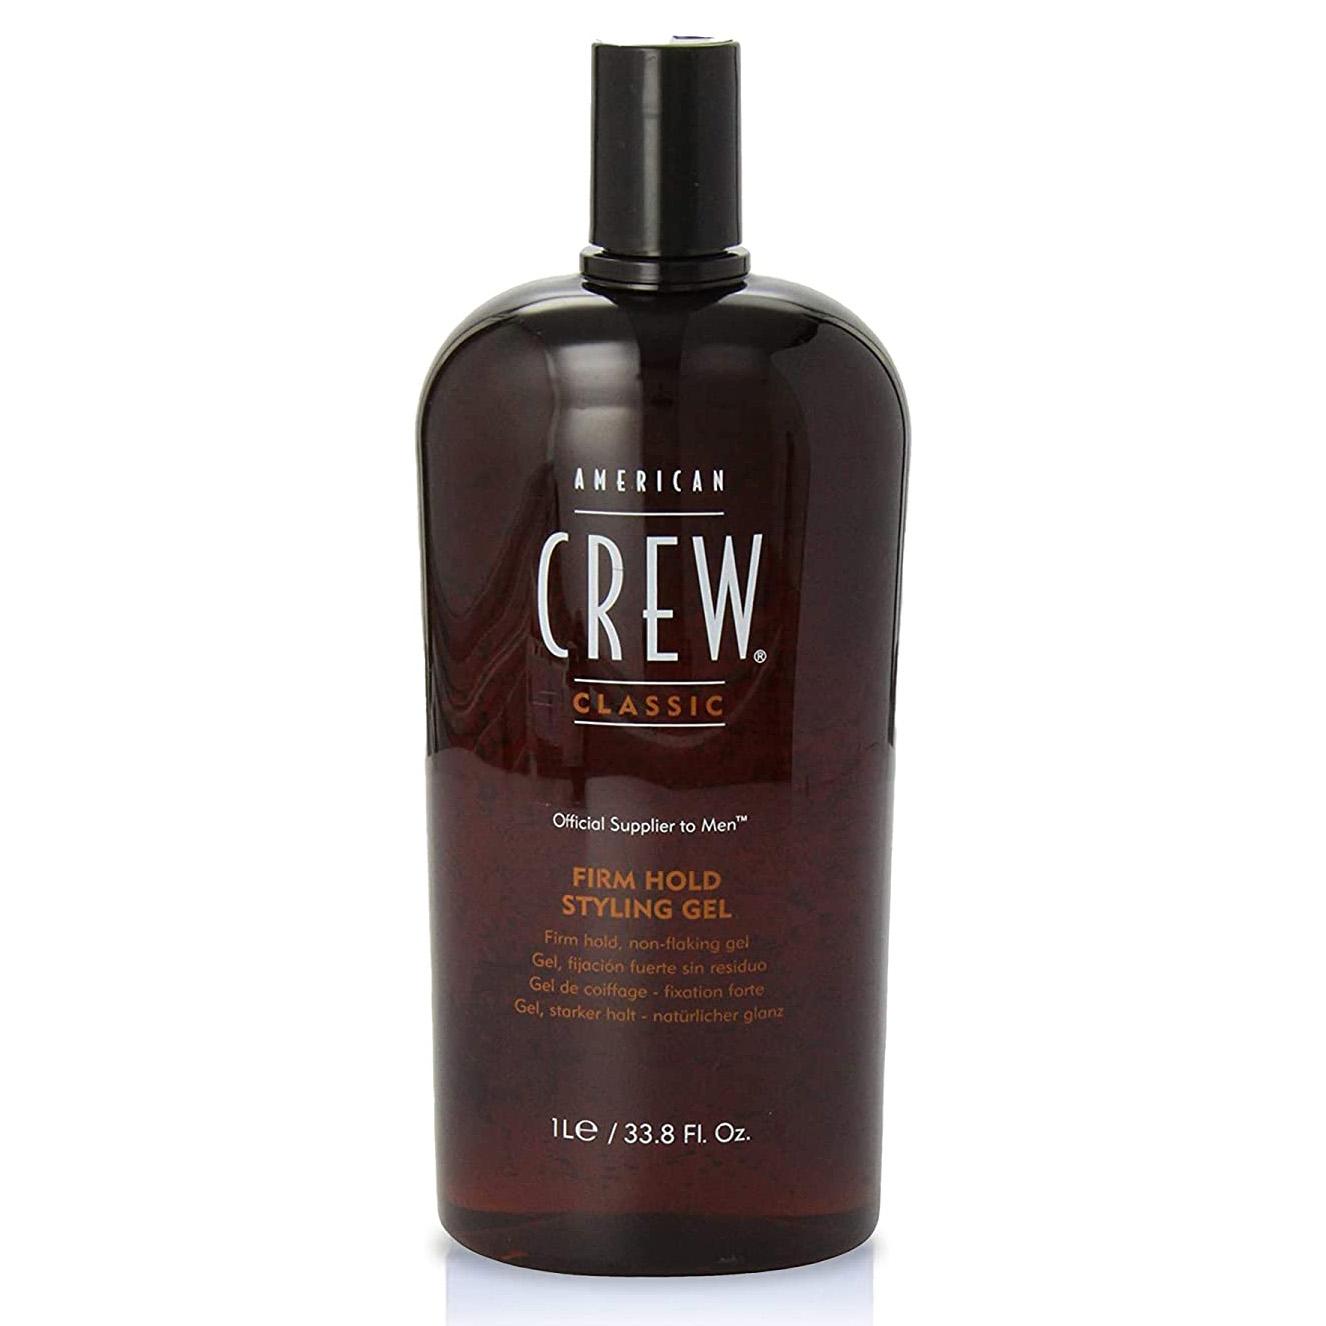 American Crew Firm Hold Hair Gel for $17.75